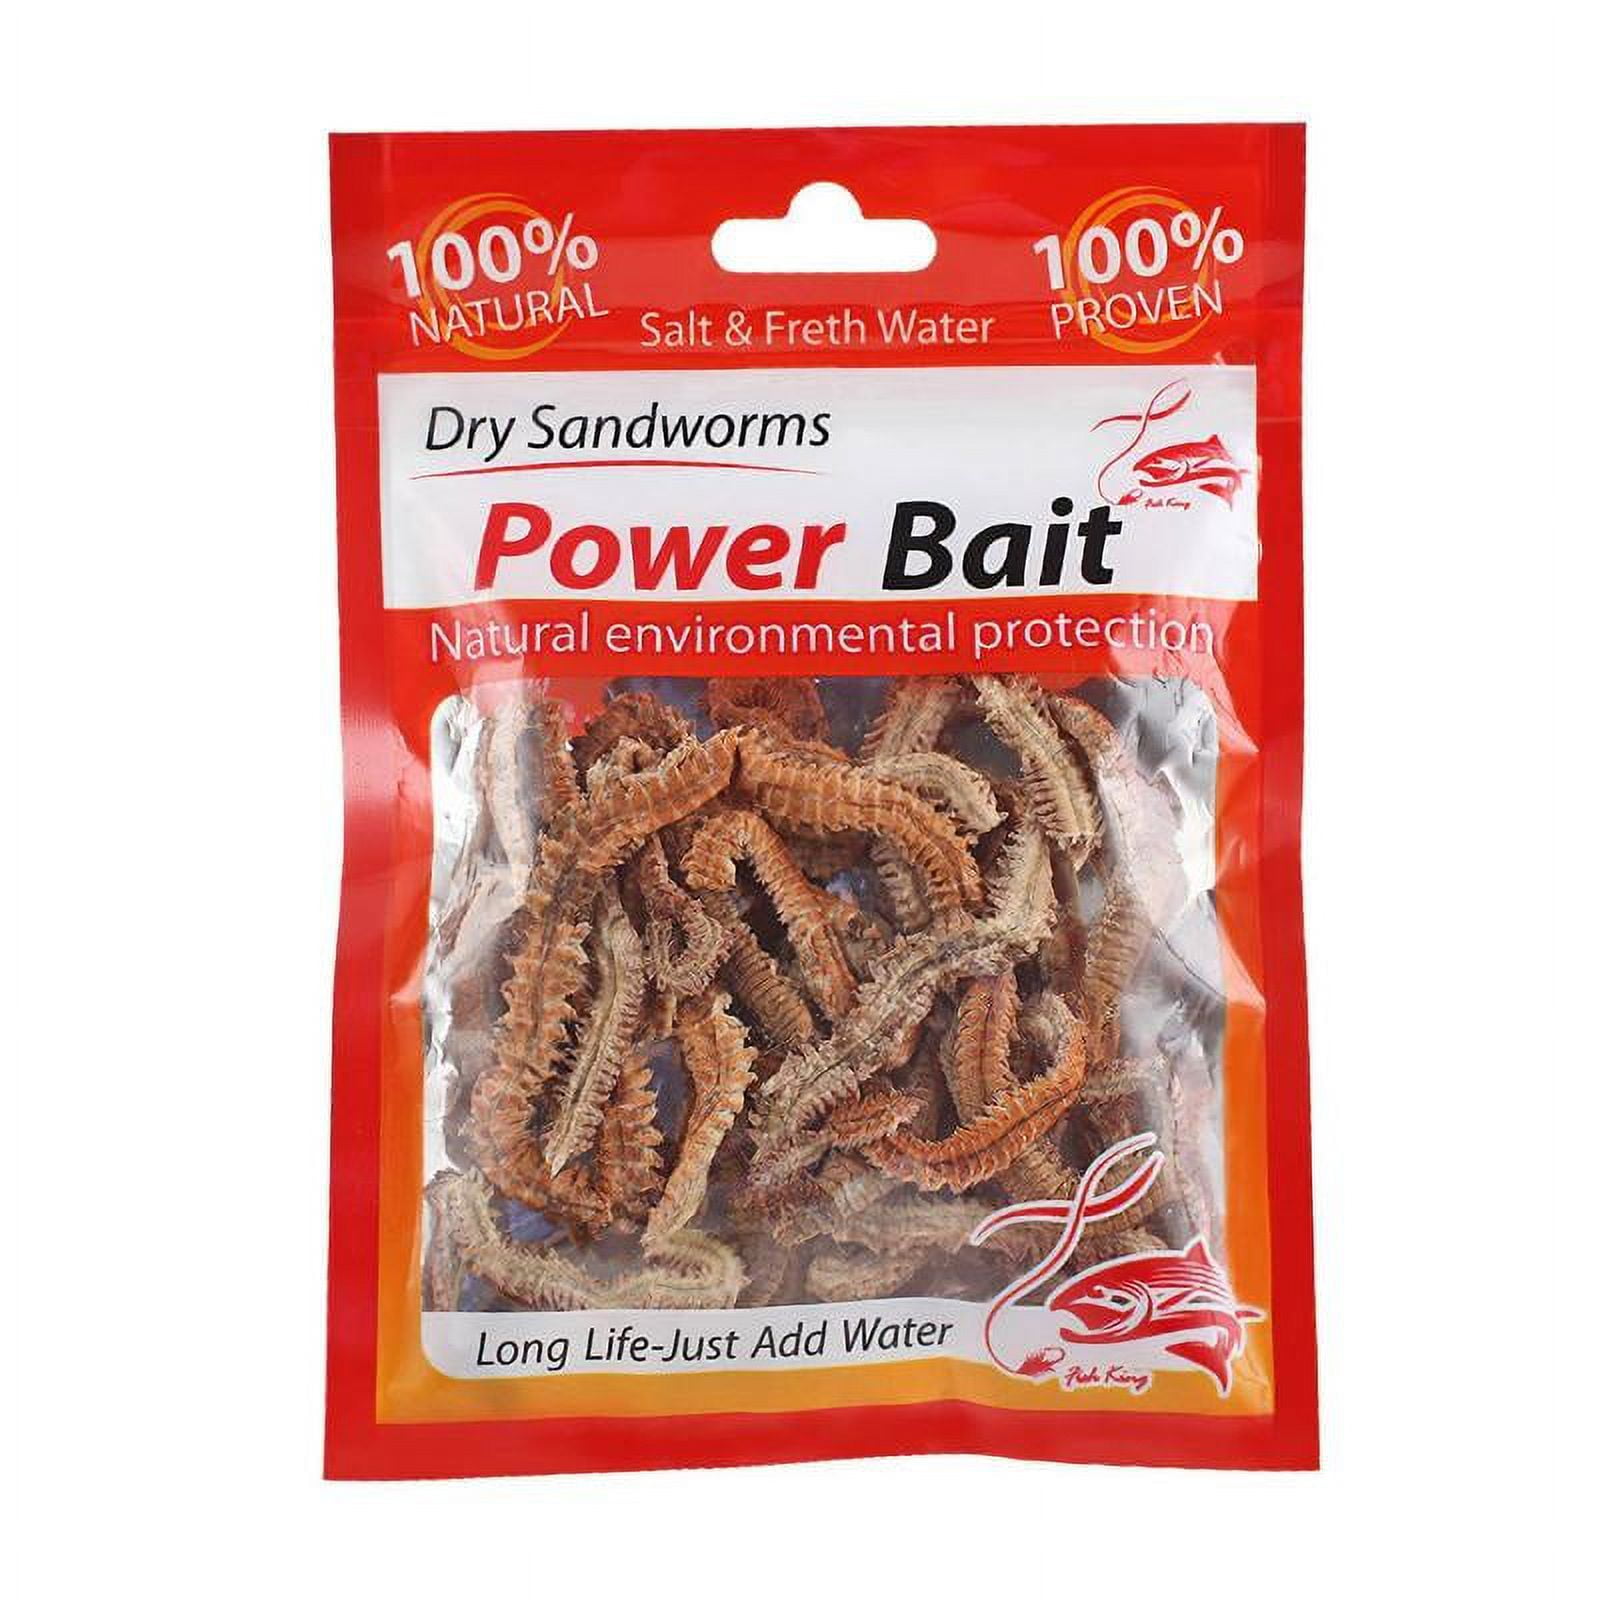 Dry Sandworm Bait And Environmental Protection Bait 1 Pack Sea Fishing Bait  Dry Sandworm And Sandworm Bait For Outdoor Fishing 